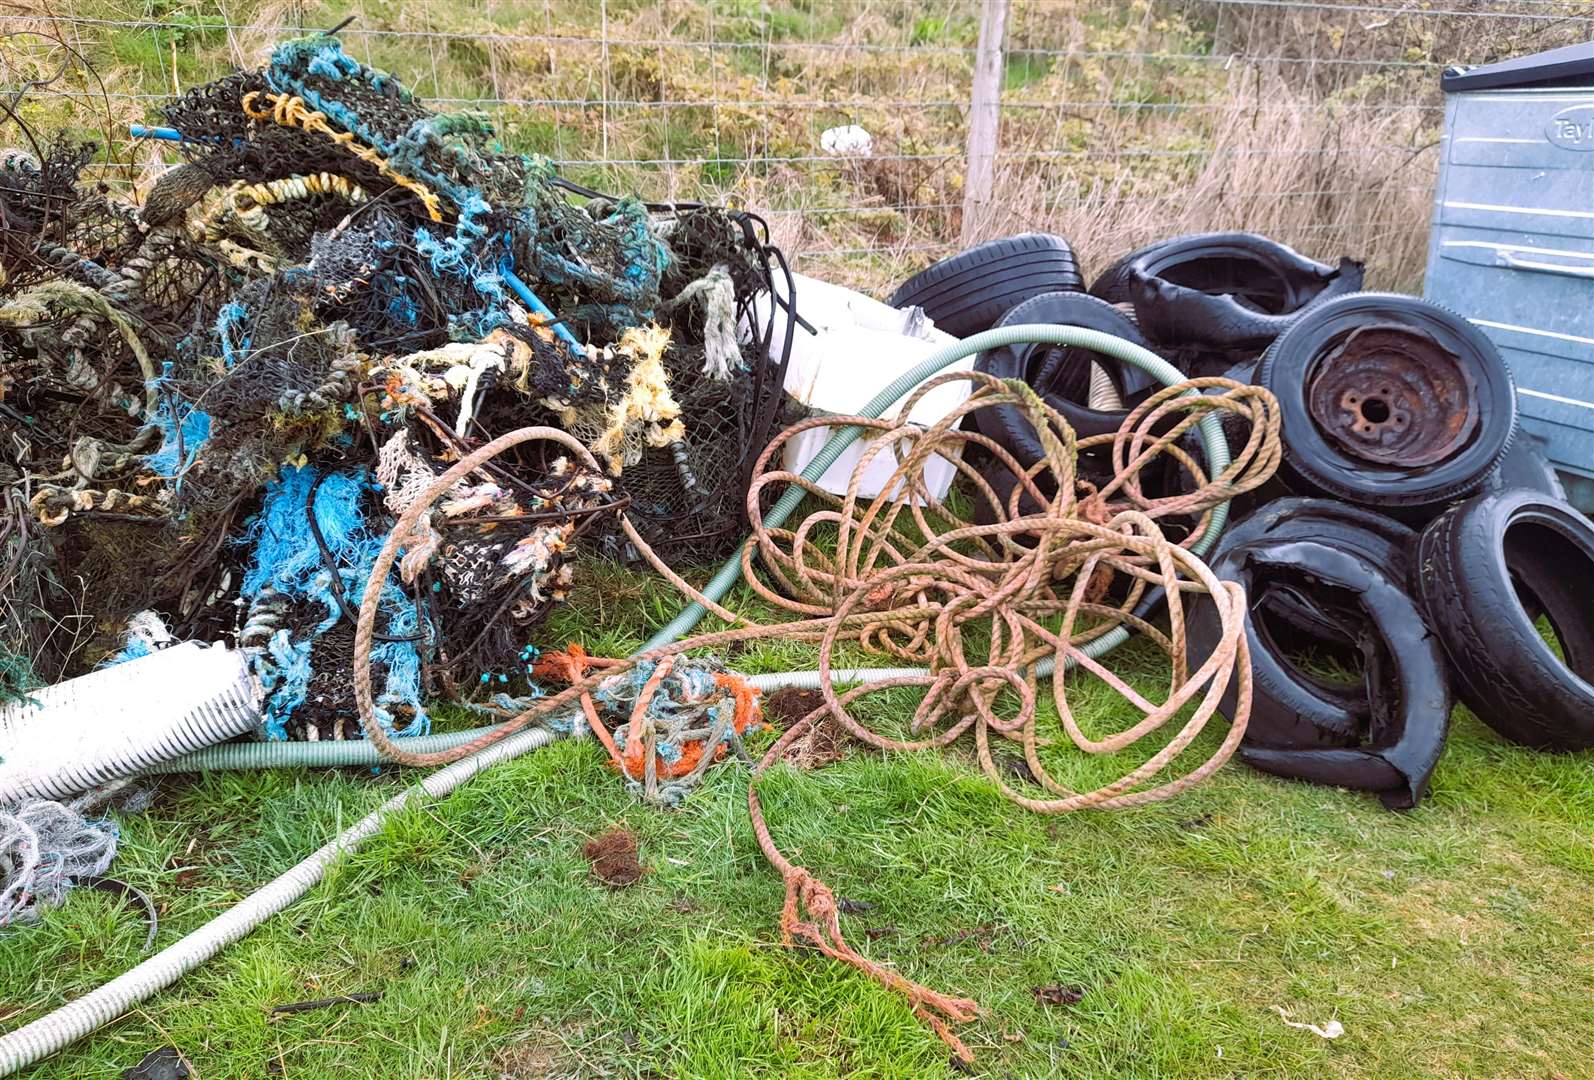 Just some of the debris found around the coast of Helmsdale. As usual, much of the plastic pollution was discarded fishing gear. Picture: Caithness Beach Cleans